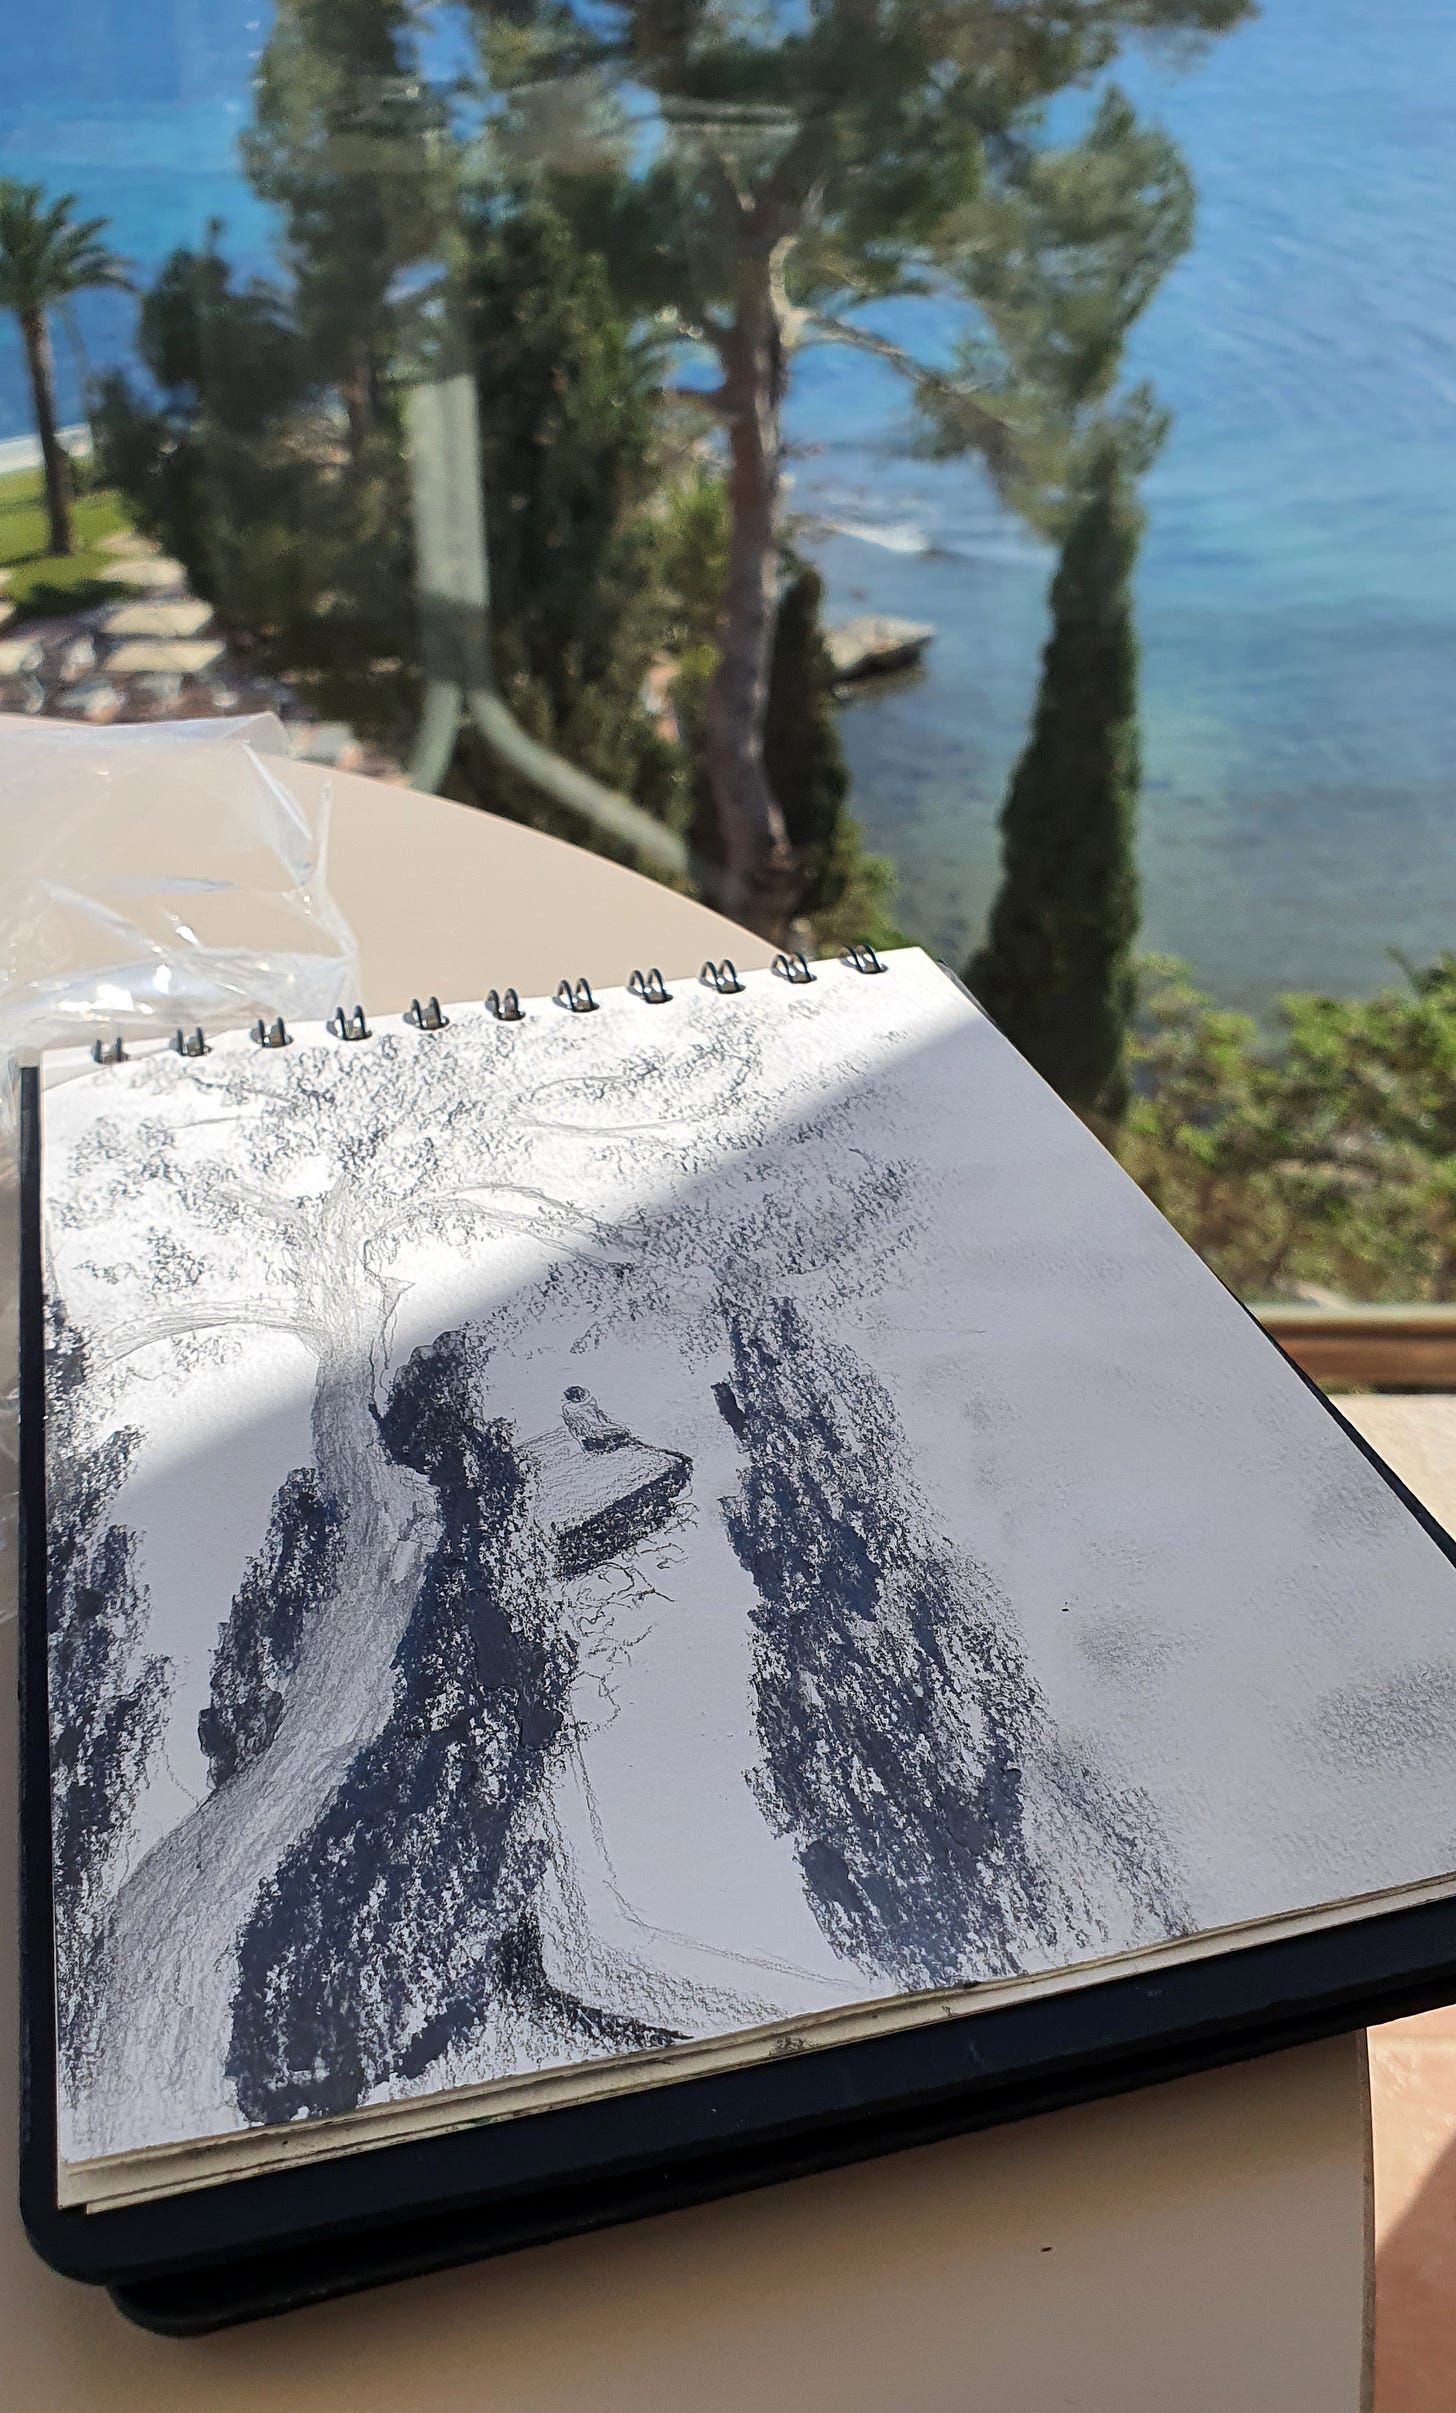 A sketch of the view below in pencil. There are trees and  a person sat looking out to sea